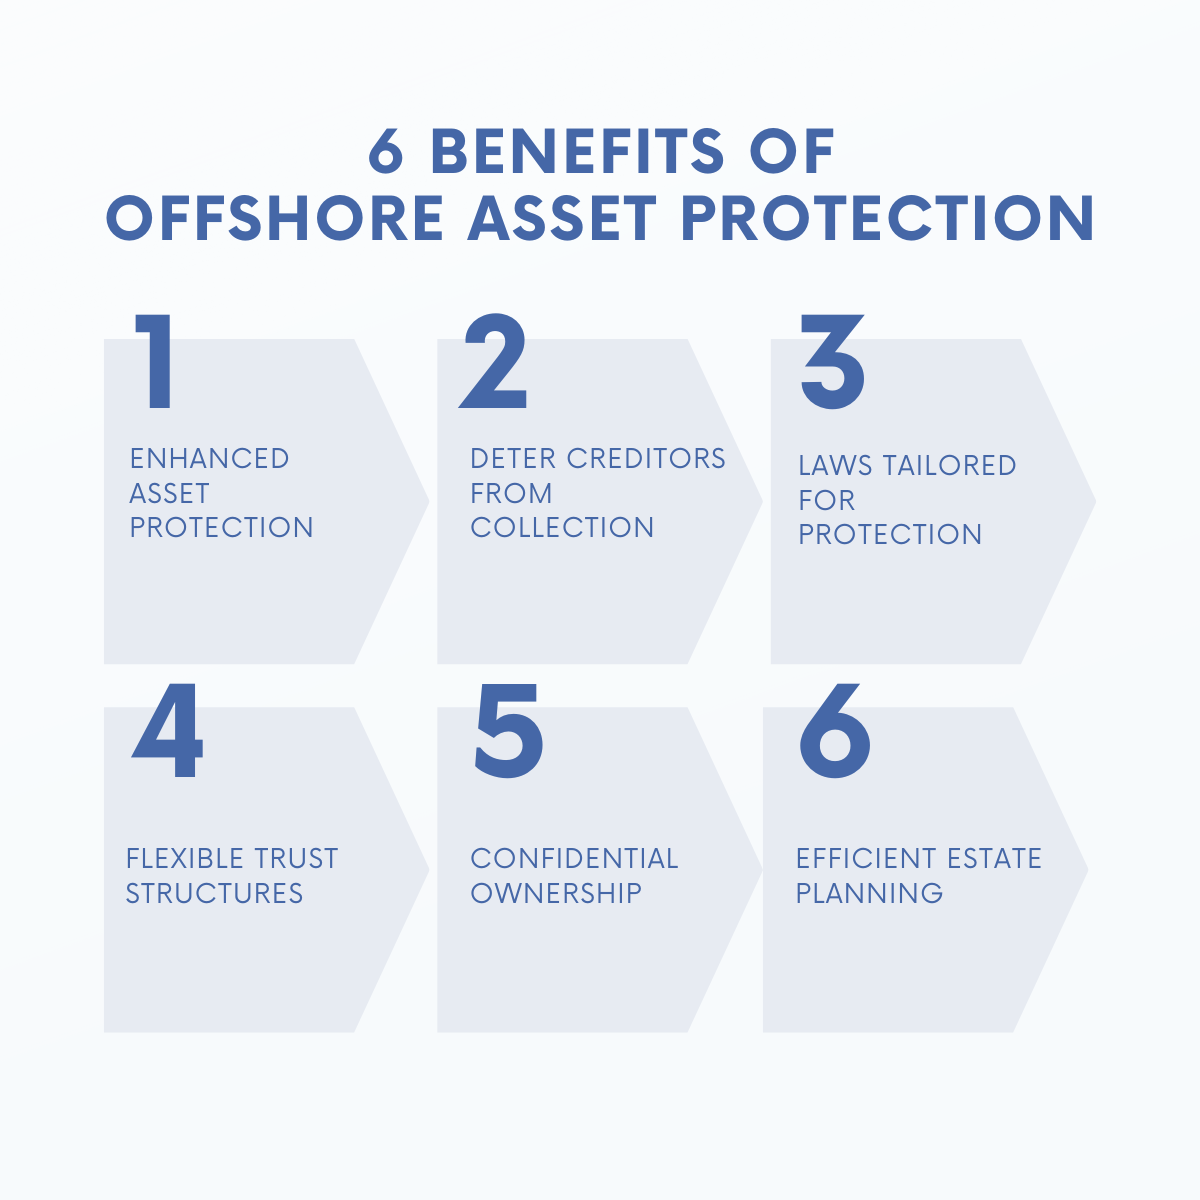 offshore asset protection benefits